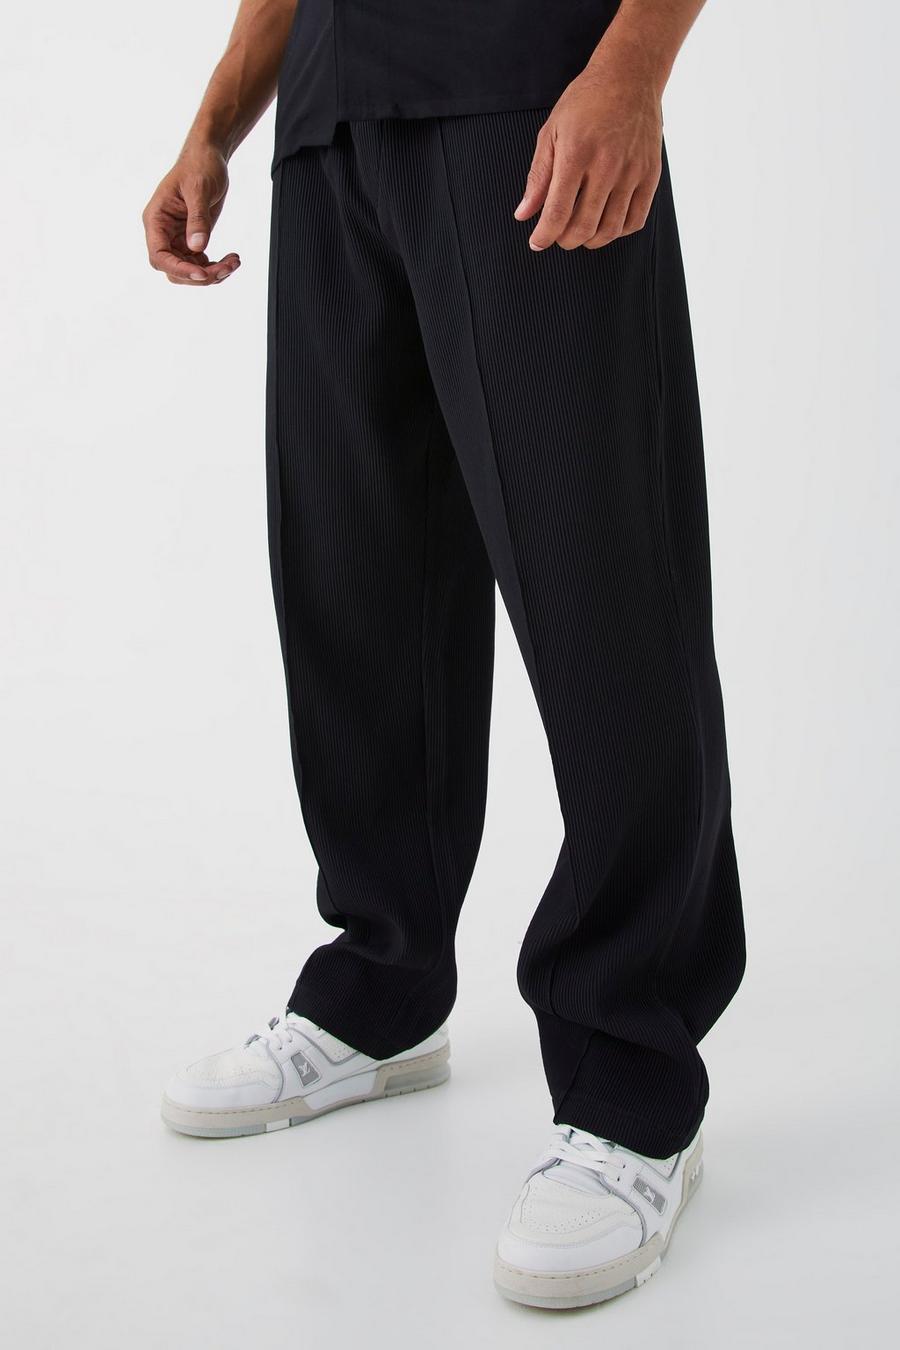 Black Elastic Waist Relaxed Fit Pleated Trouser